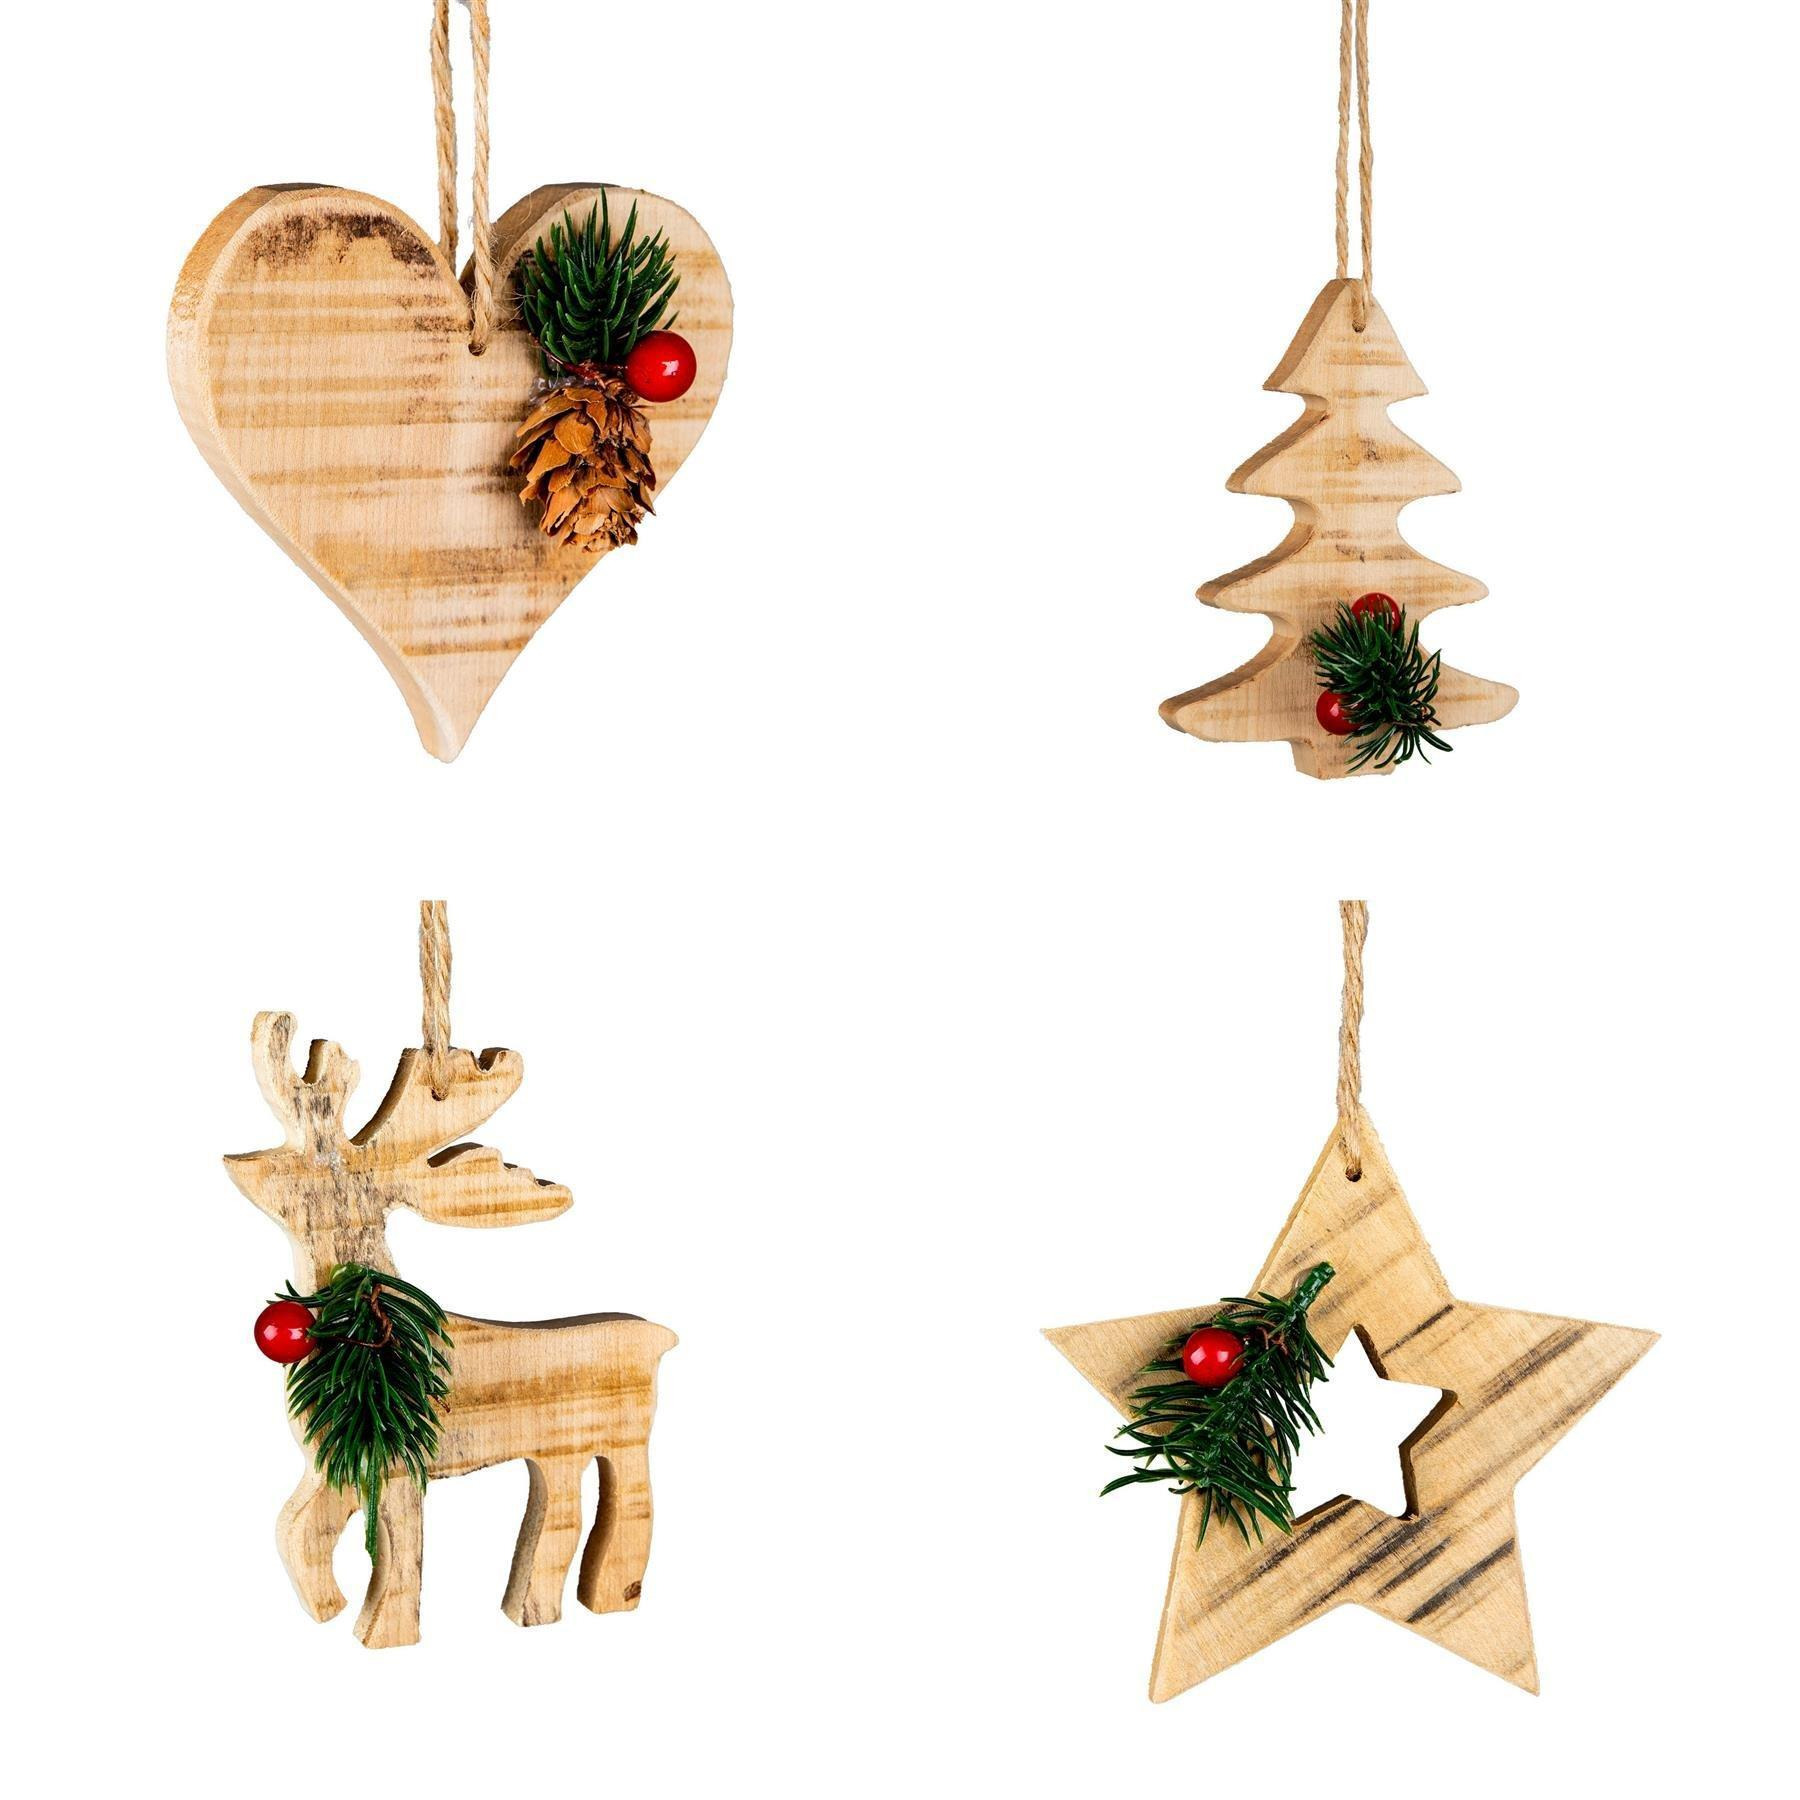 4Pcs Wooden Craft Assorted Shapes - Heart,Tree,Star,Reindeer- Christmas Tree Hanging Decorations - image 1